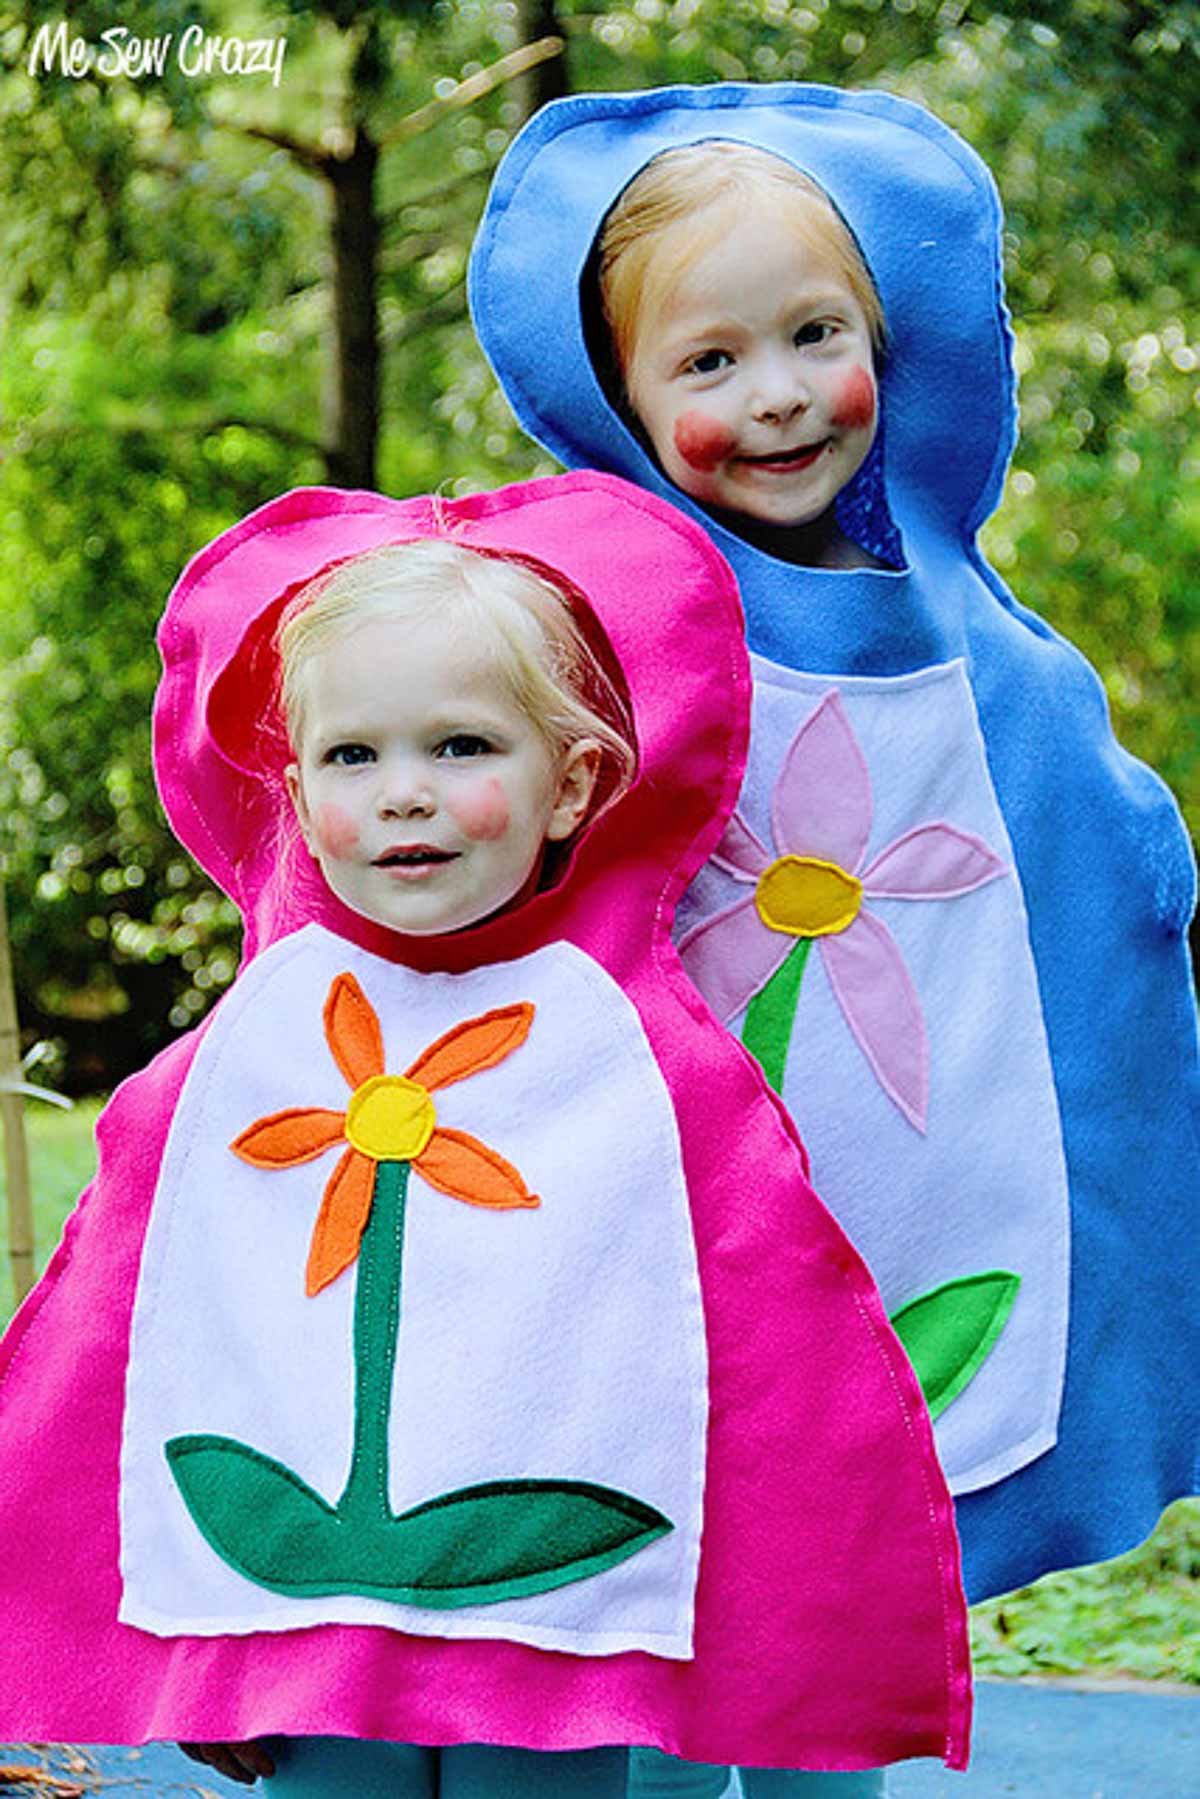 Two children wearing DIY Russian nesting doll costumes (Matryoshka) in pink and blue.